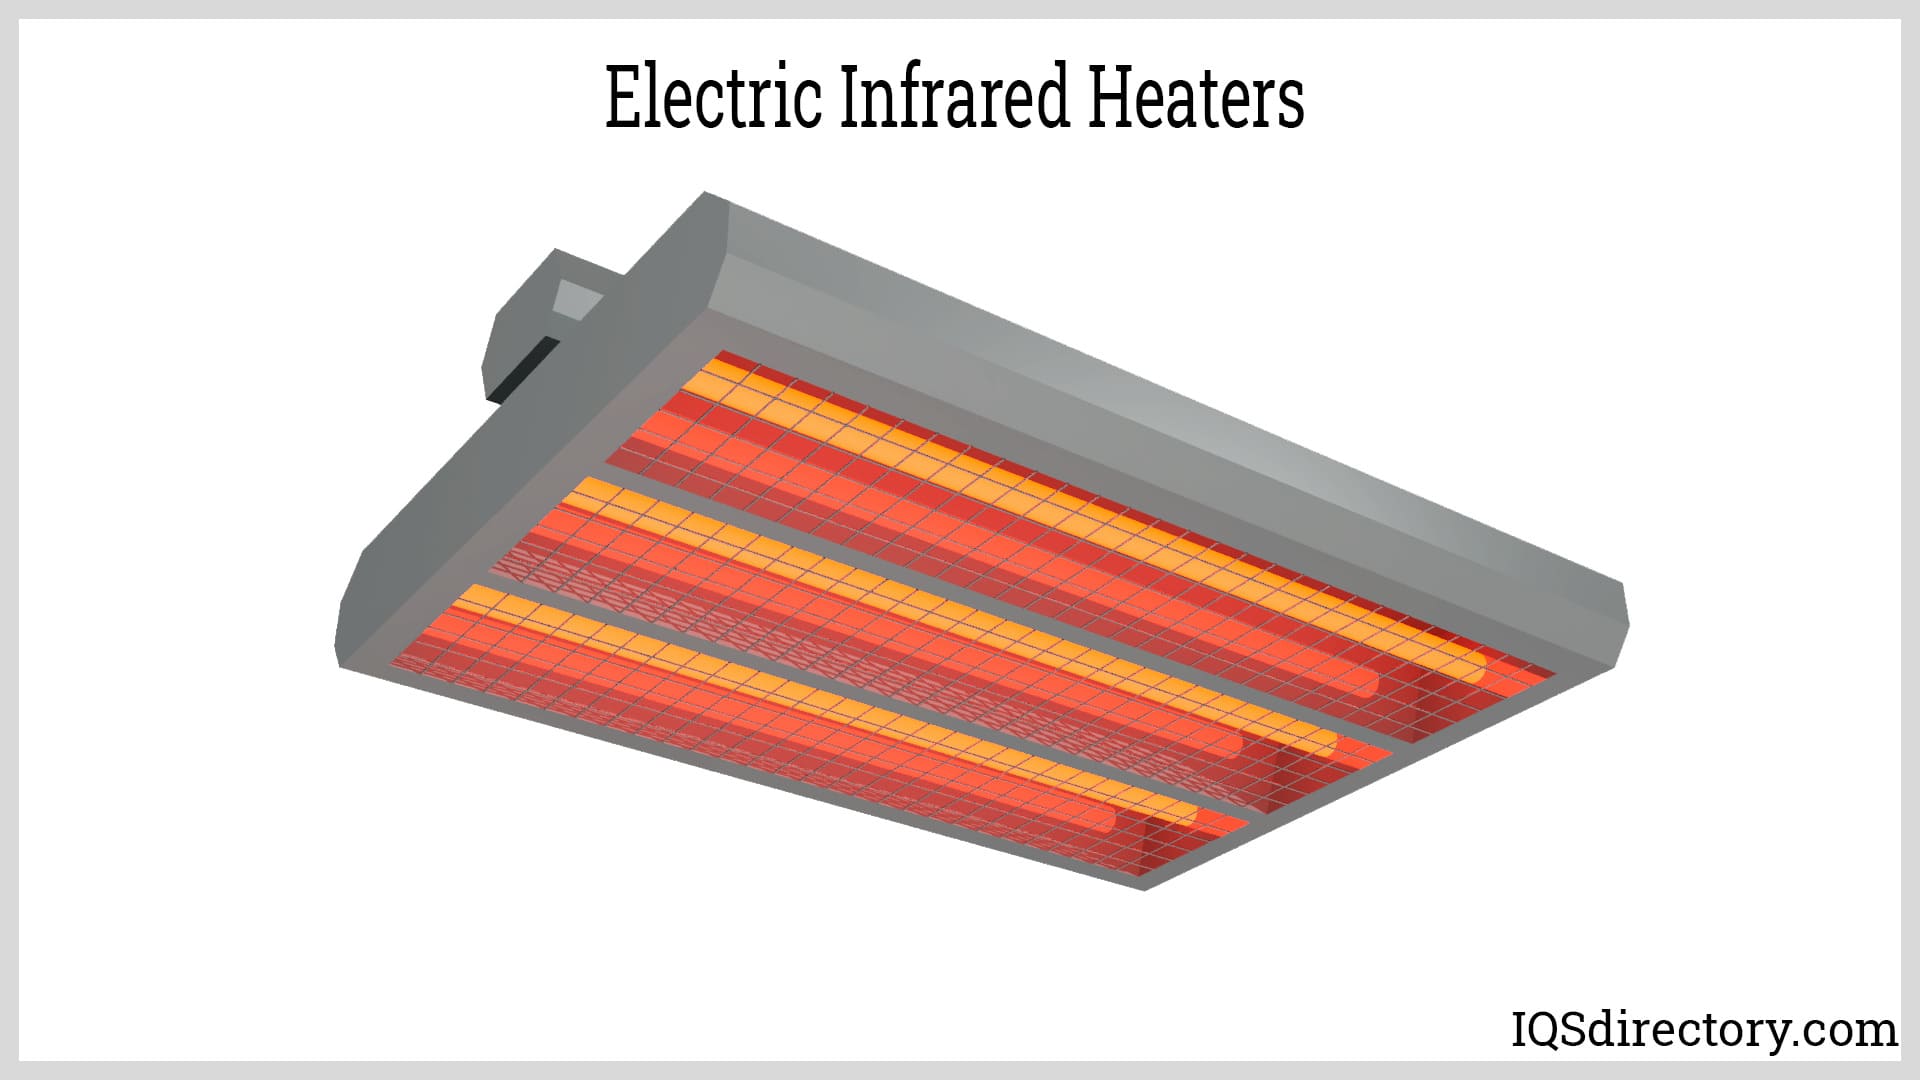 Electric Infrared Heaters